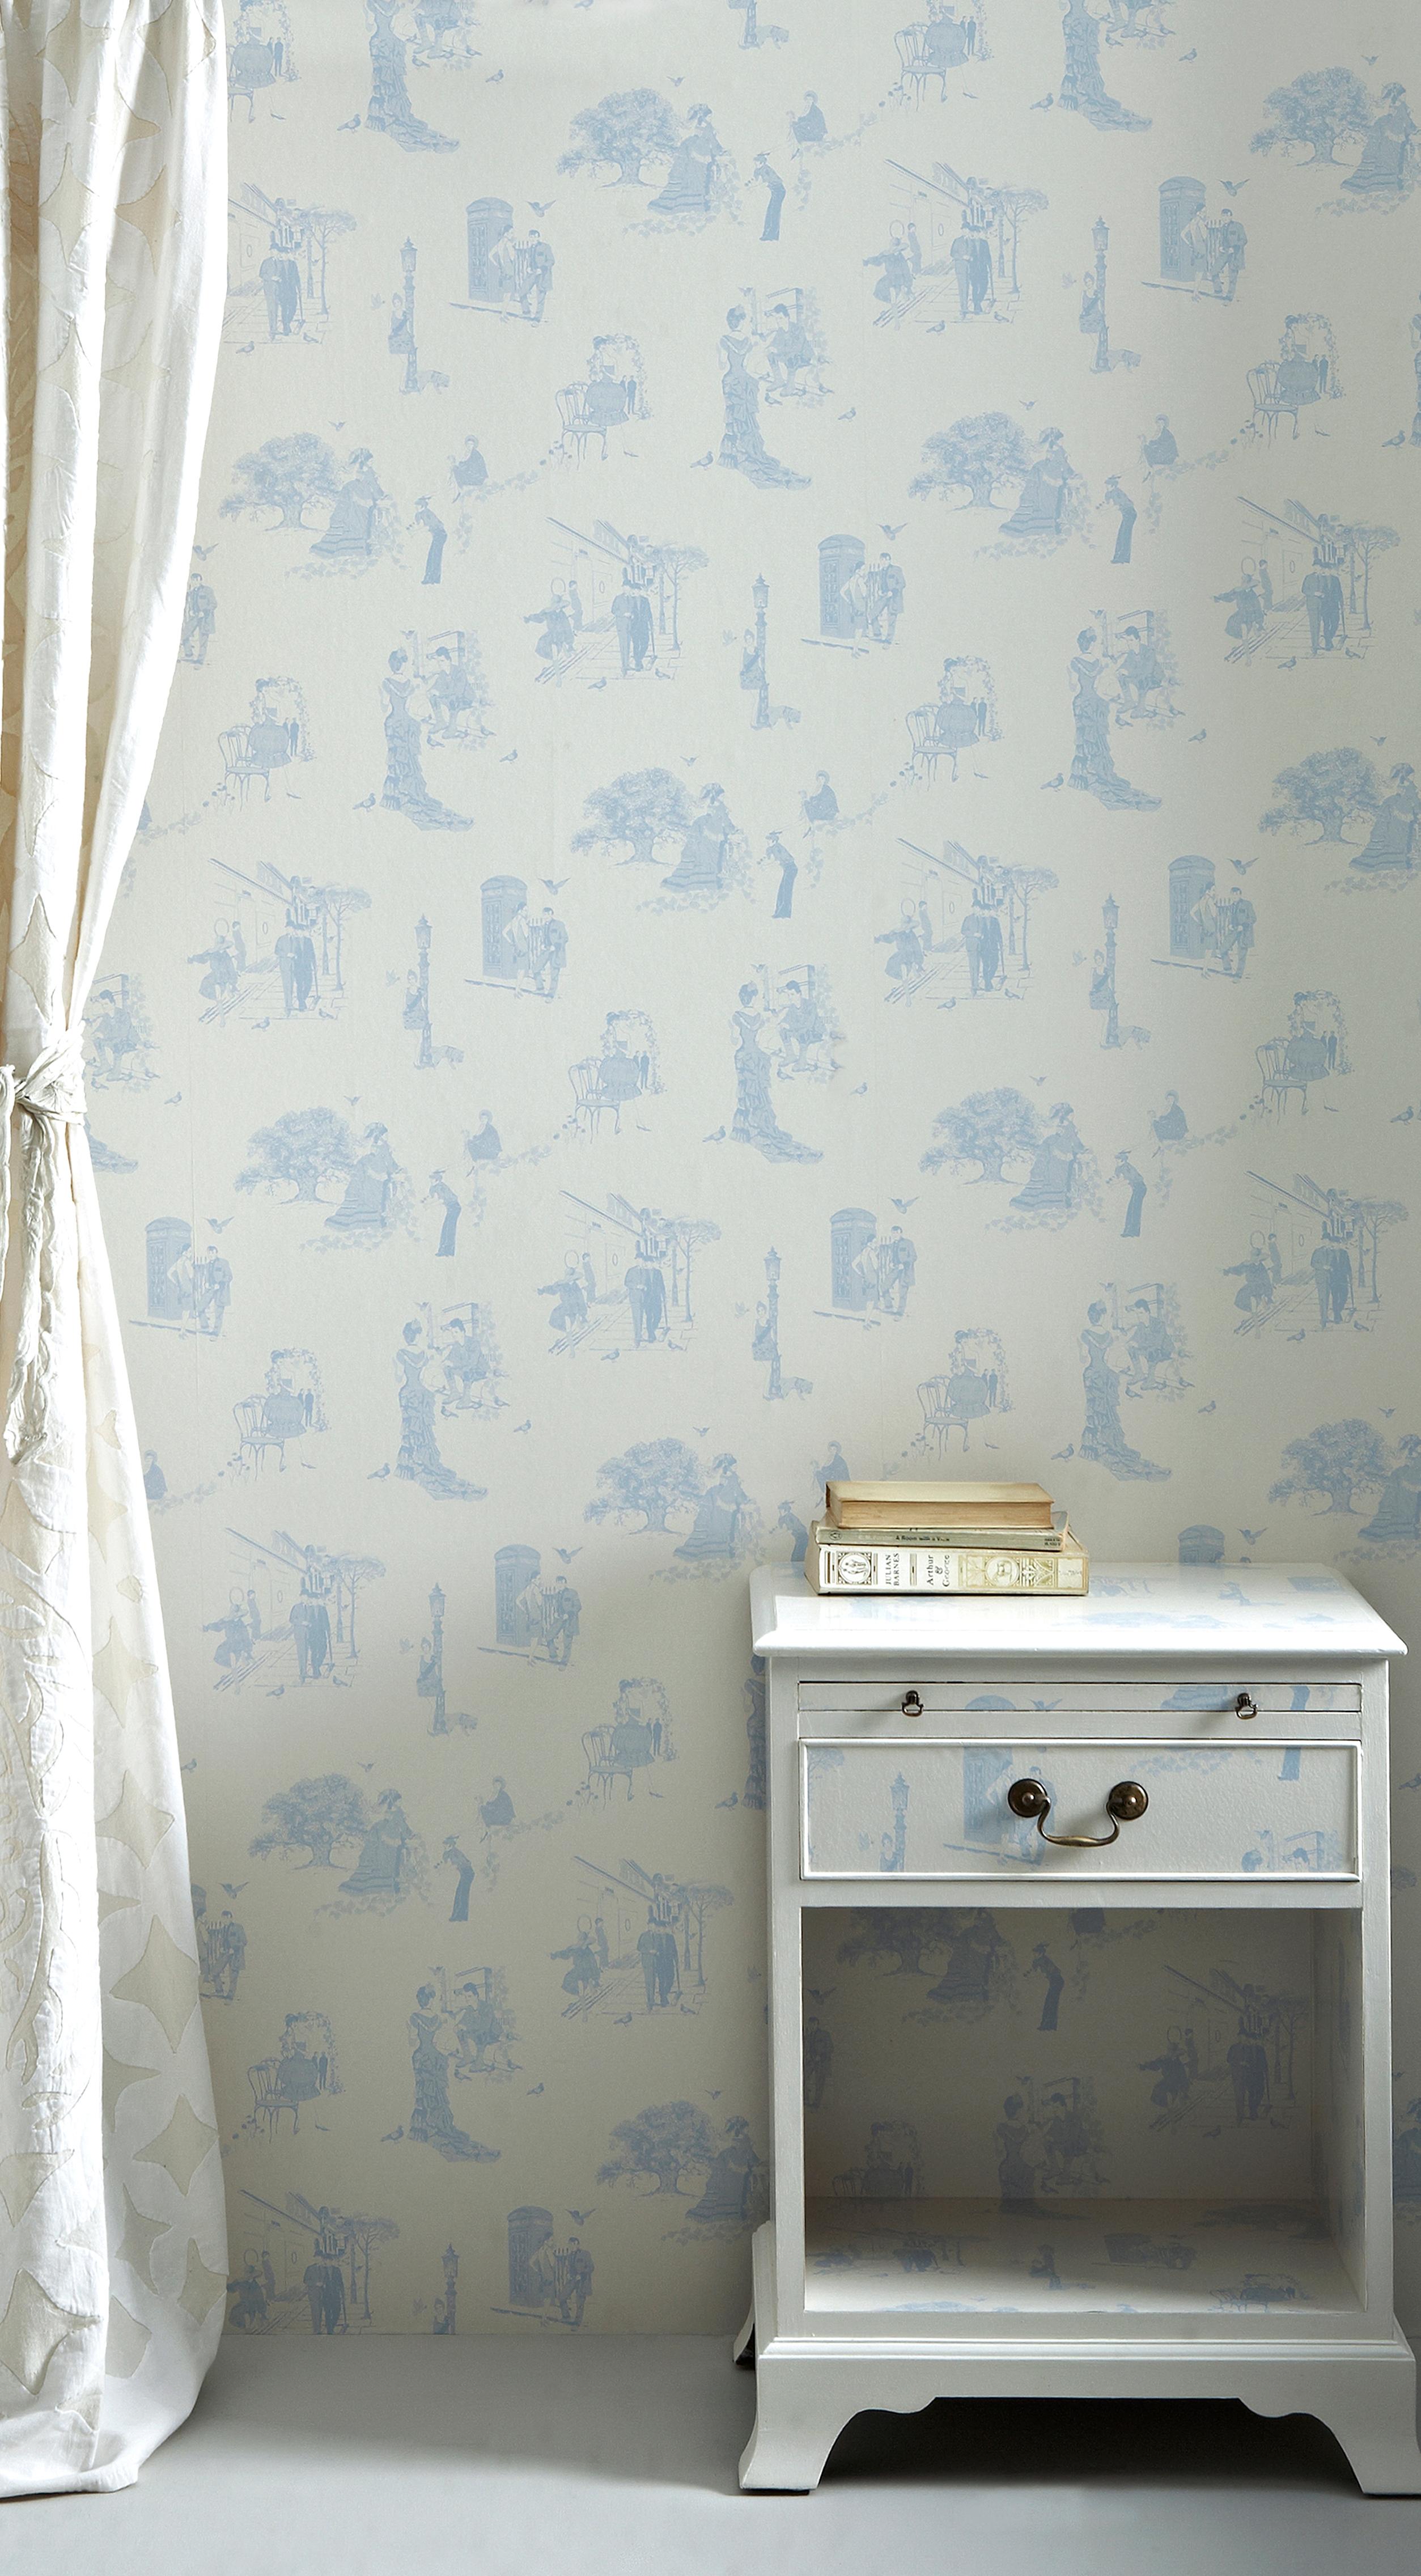 Color: Wedgewood Blue
Trim width: 52cm/20.5 inches
Roll Length: 10m
Pattern Repeat: Straight Match
Match Length: 52cm/20.5 inches.

Please get in contact to order a sample.

Our homage to French Toile de Jouy reveals a playful take on the fashions